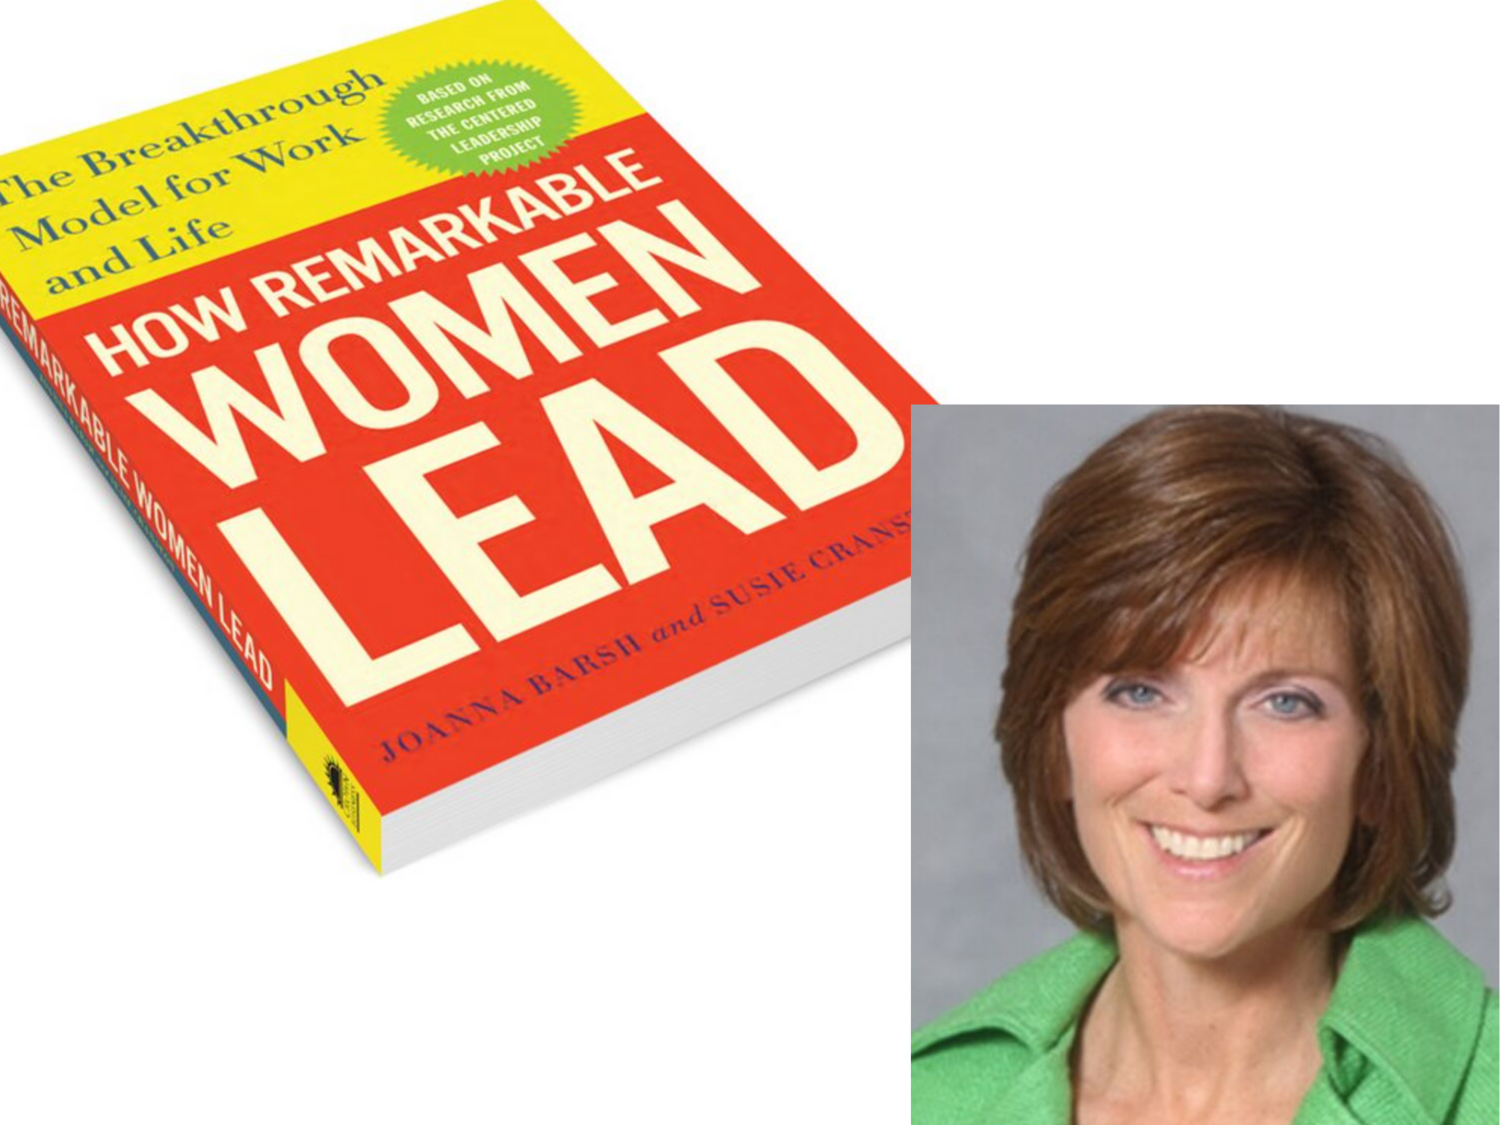 How DO remarkable women lead?  Session 1